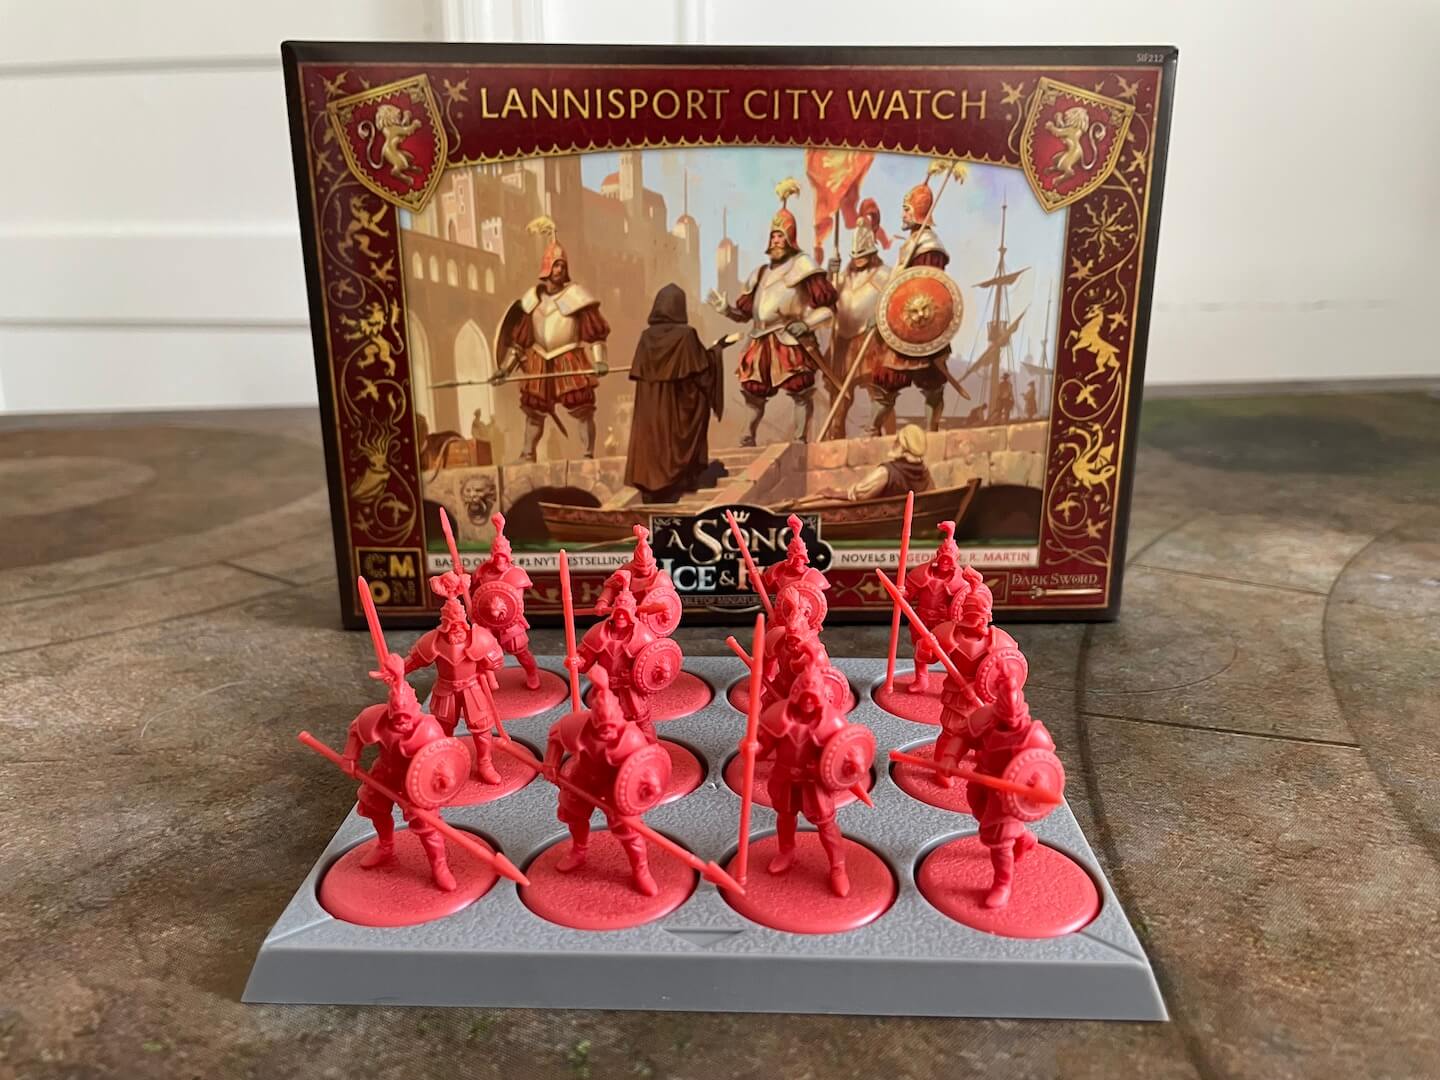 The Lannisport City Watch for A Song of Ice and Fire Tabletop Miniatures Game